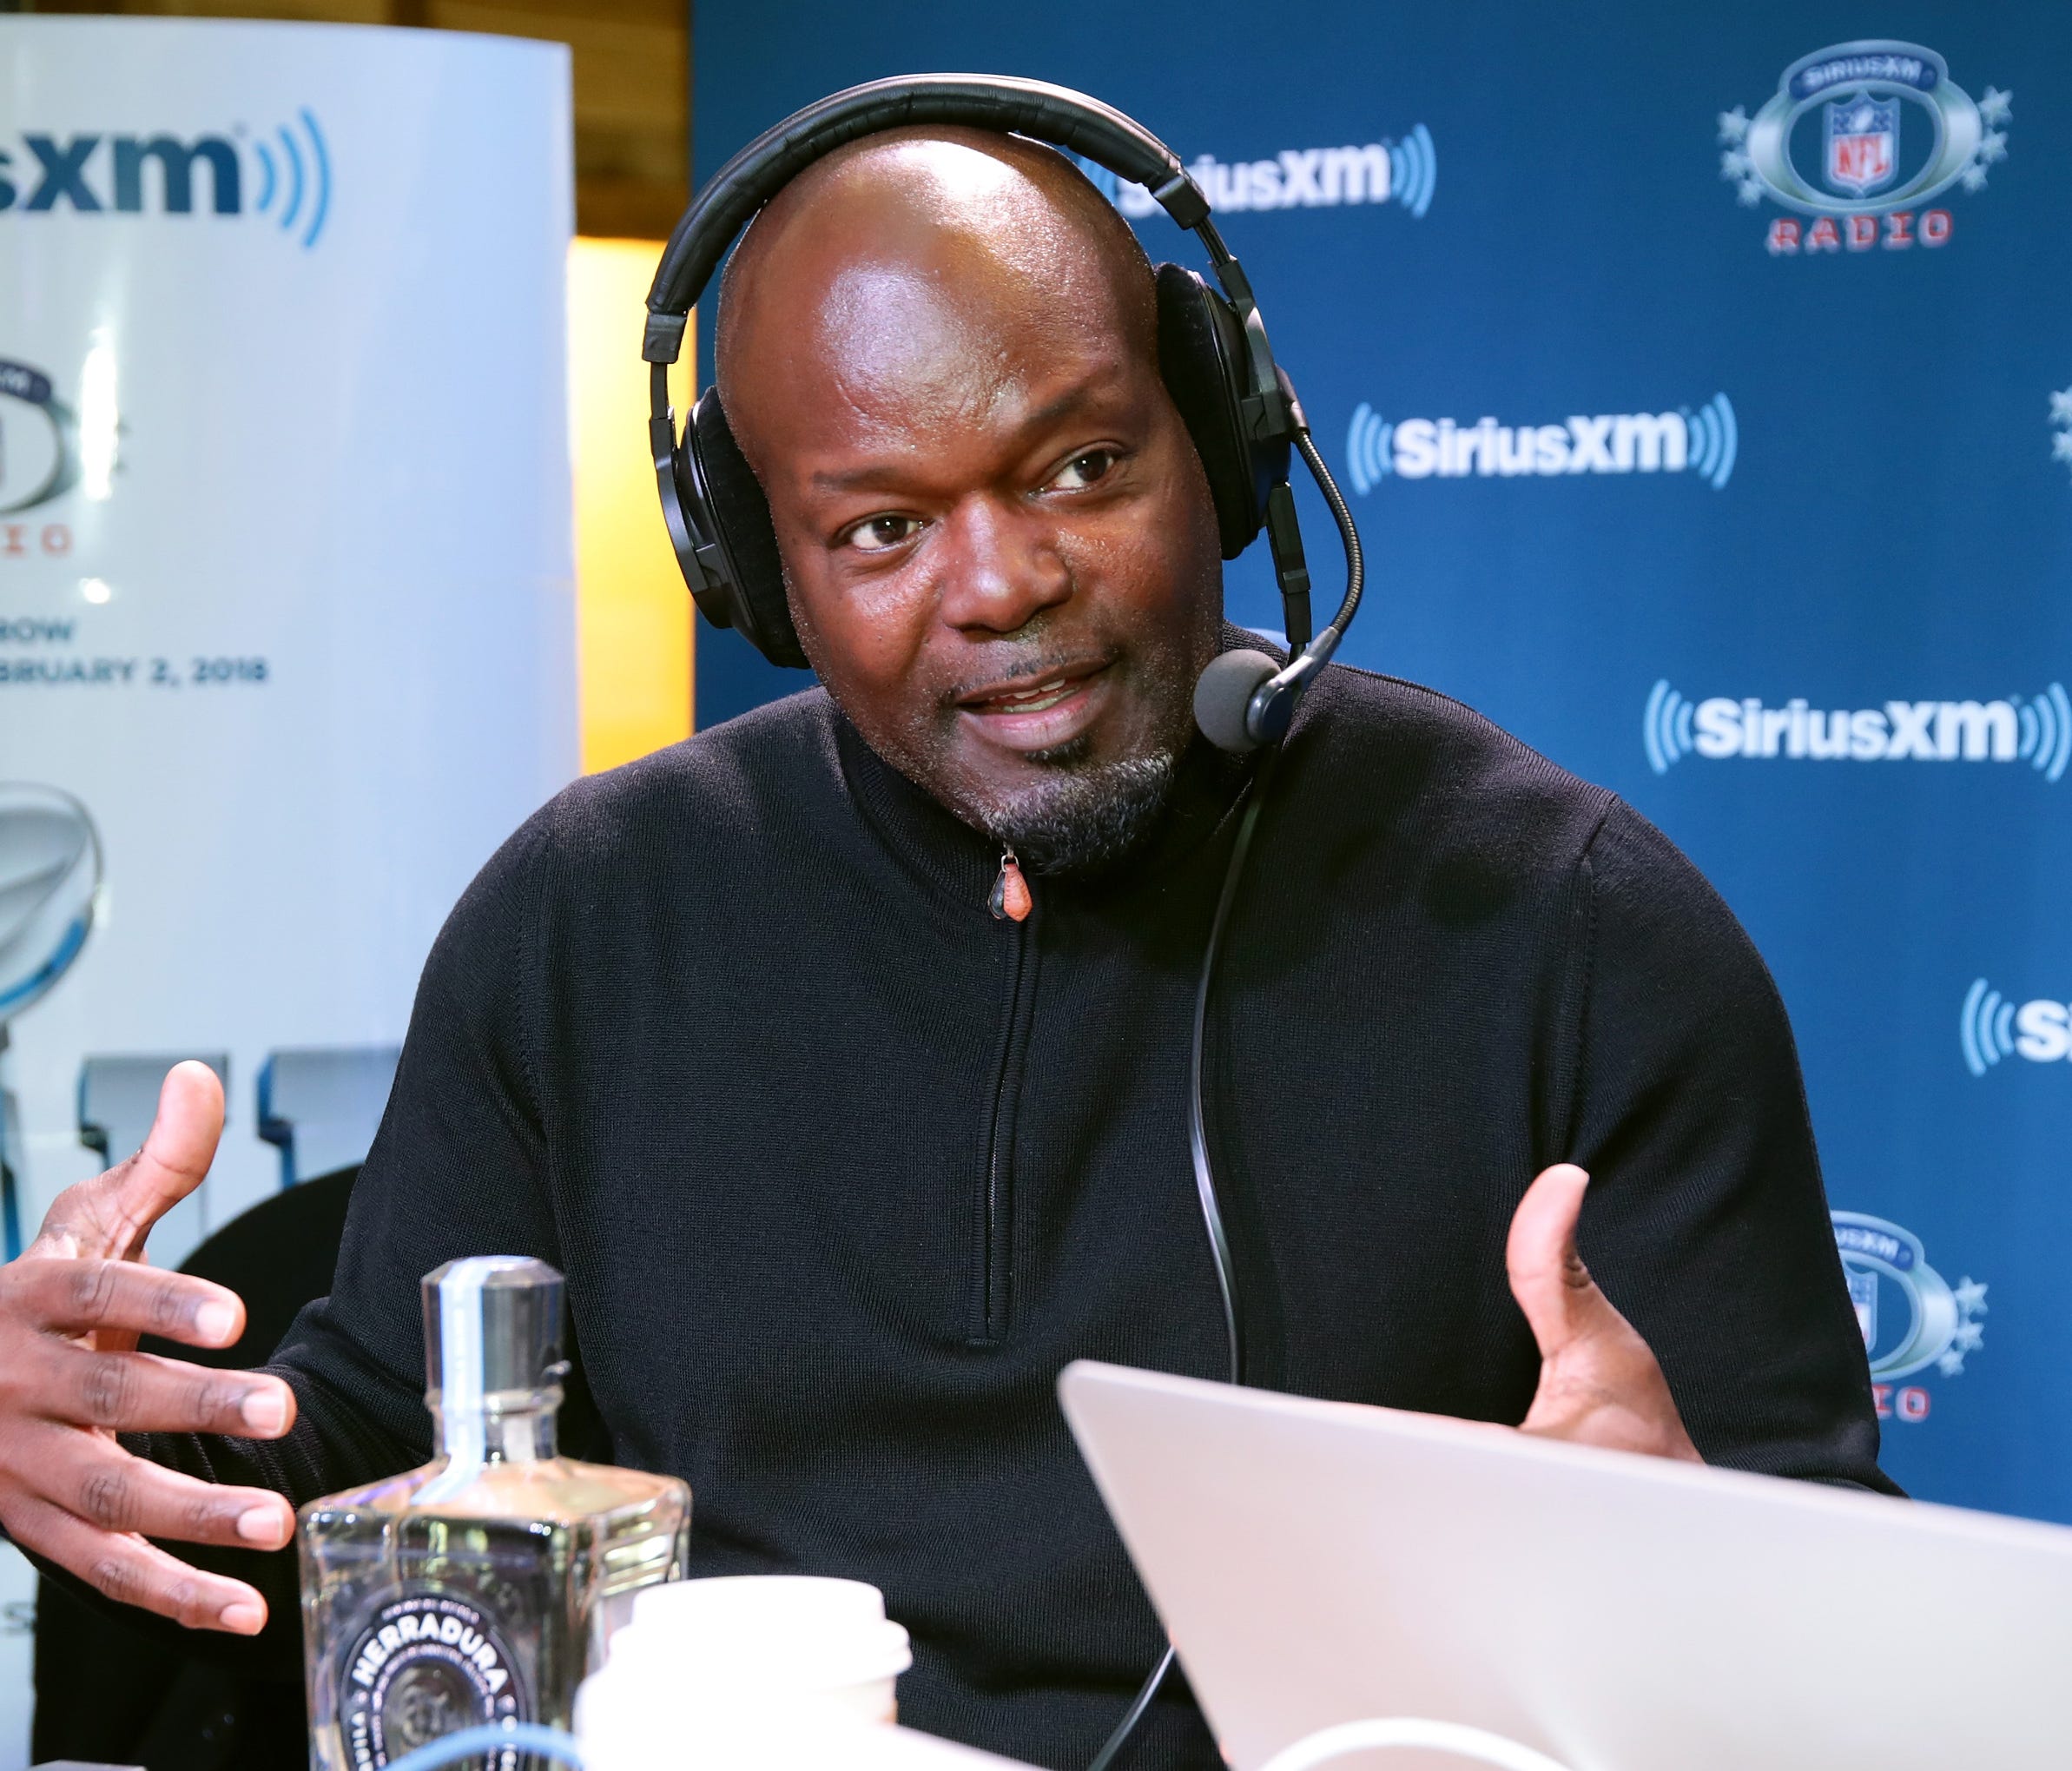 BLOOMINGTON, MN - FEBRUARY 01:  Former NFL player and NFL Hall of Fame player Emmitt Smith attends SiriusXM at Super Bowl LII Radio Row at the Mall of America on February 1, 2018 in Bloomington, Minnesota.  (Photo by Cindy Ord/Getty Images for Sirius